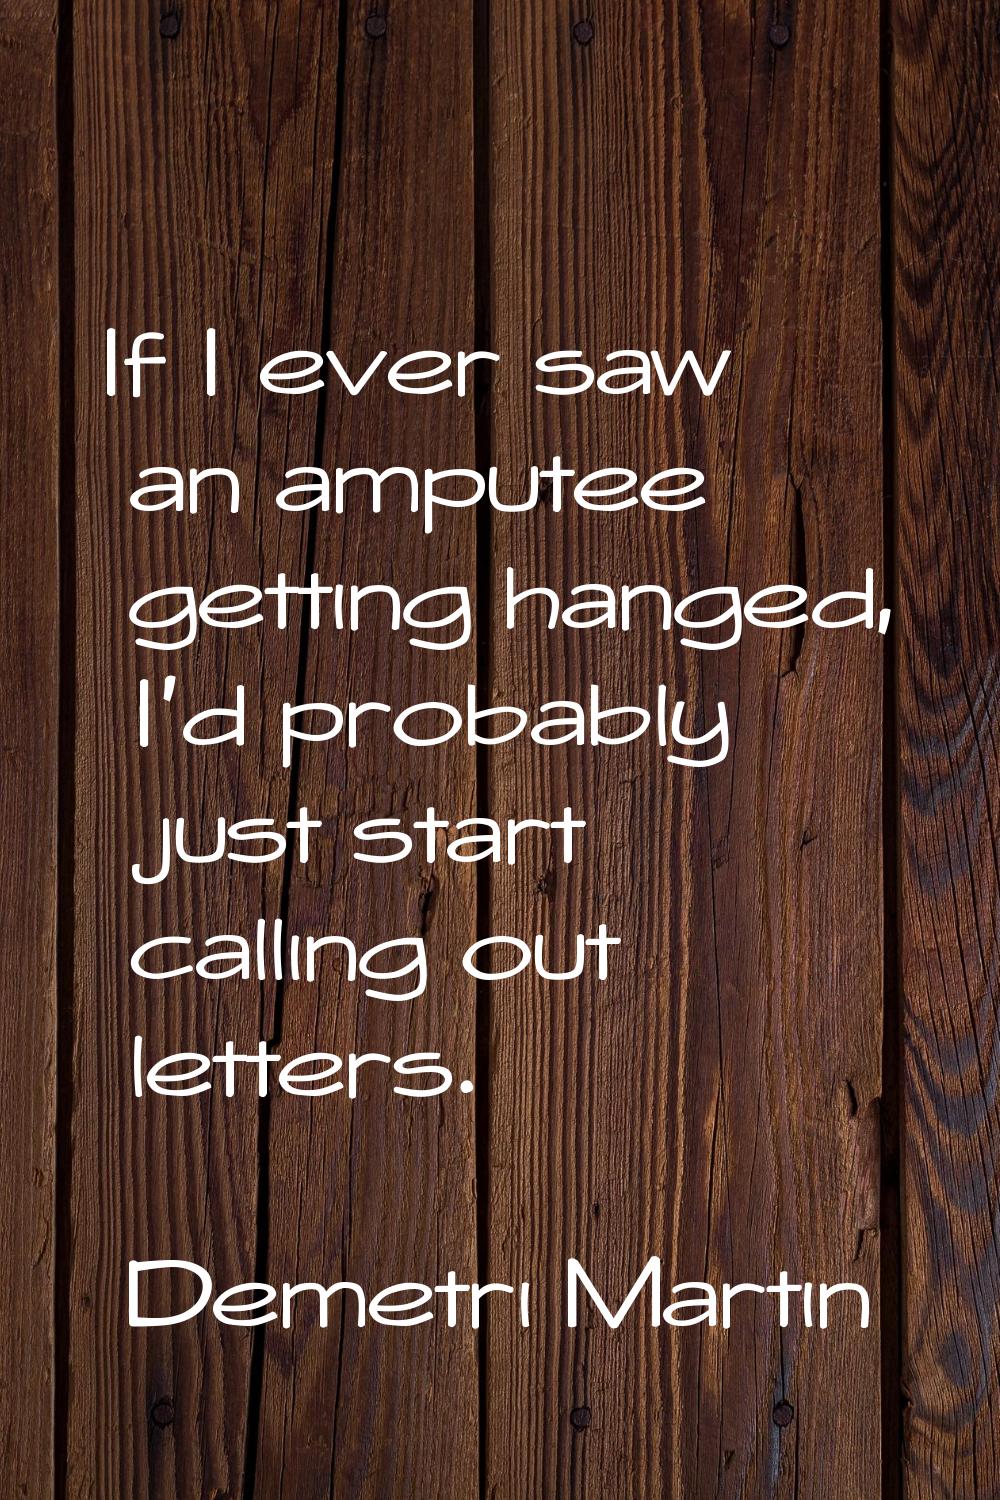 If I ever saw an amputee getting hanged, I'd probably just start calling out letters.